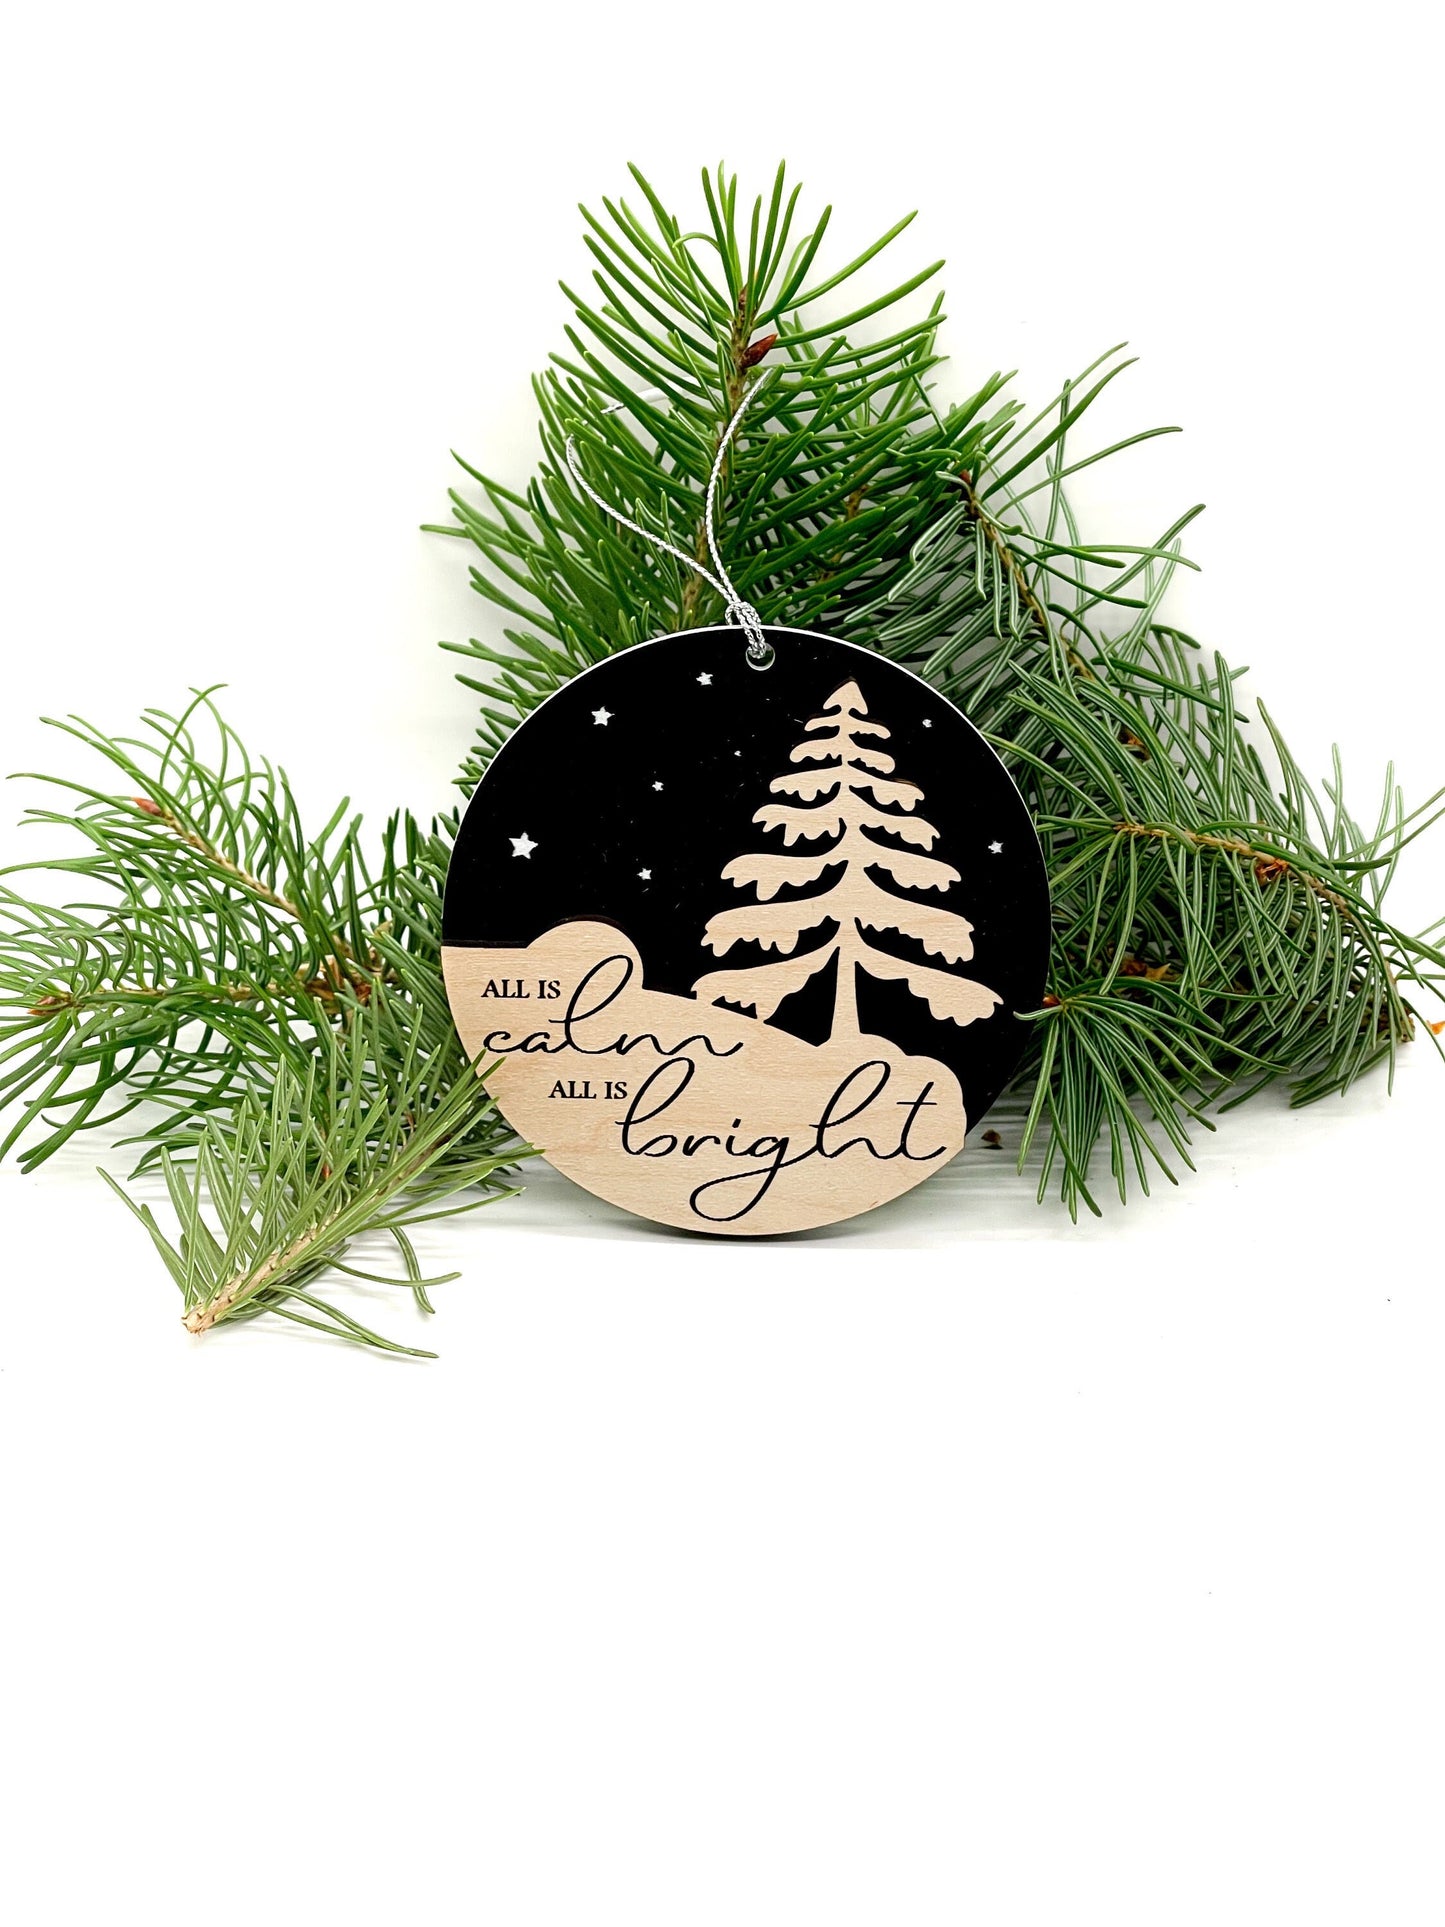 All is Calm All is Bright Ornament | Christmas Ornament | Silent Night Ornament